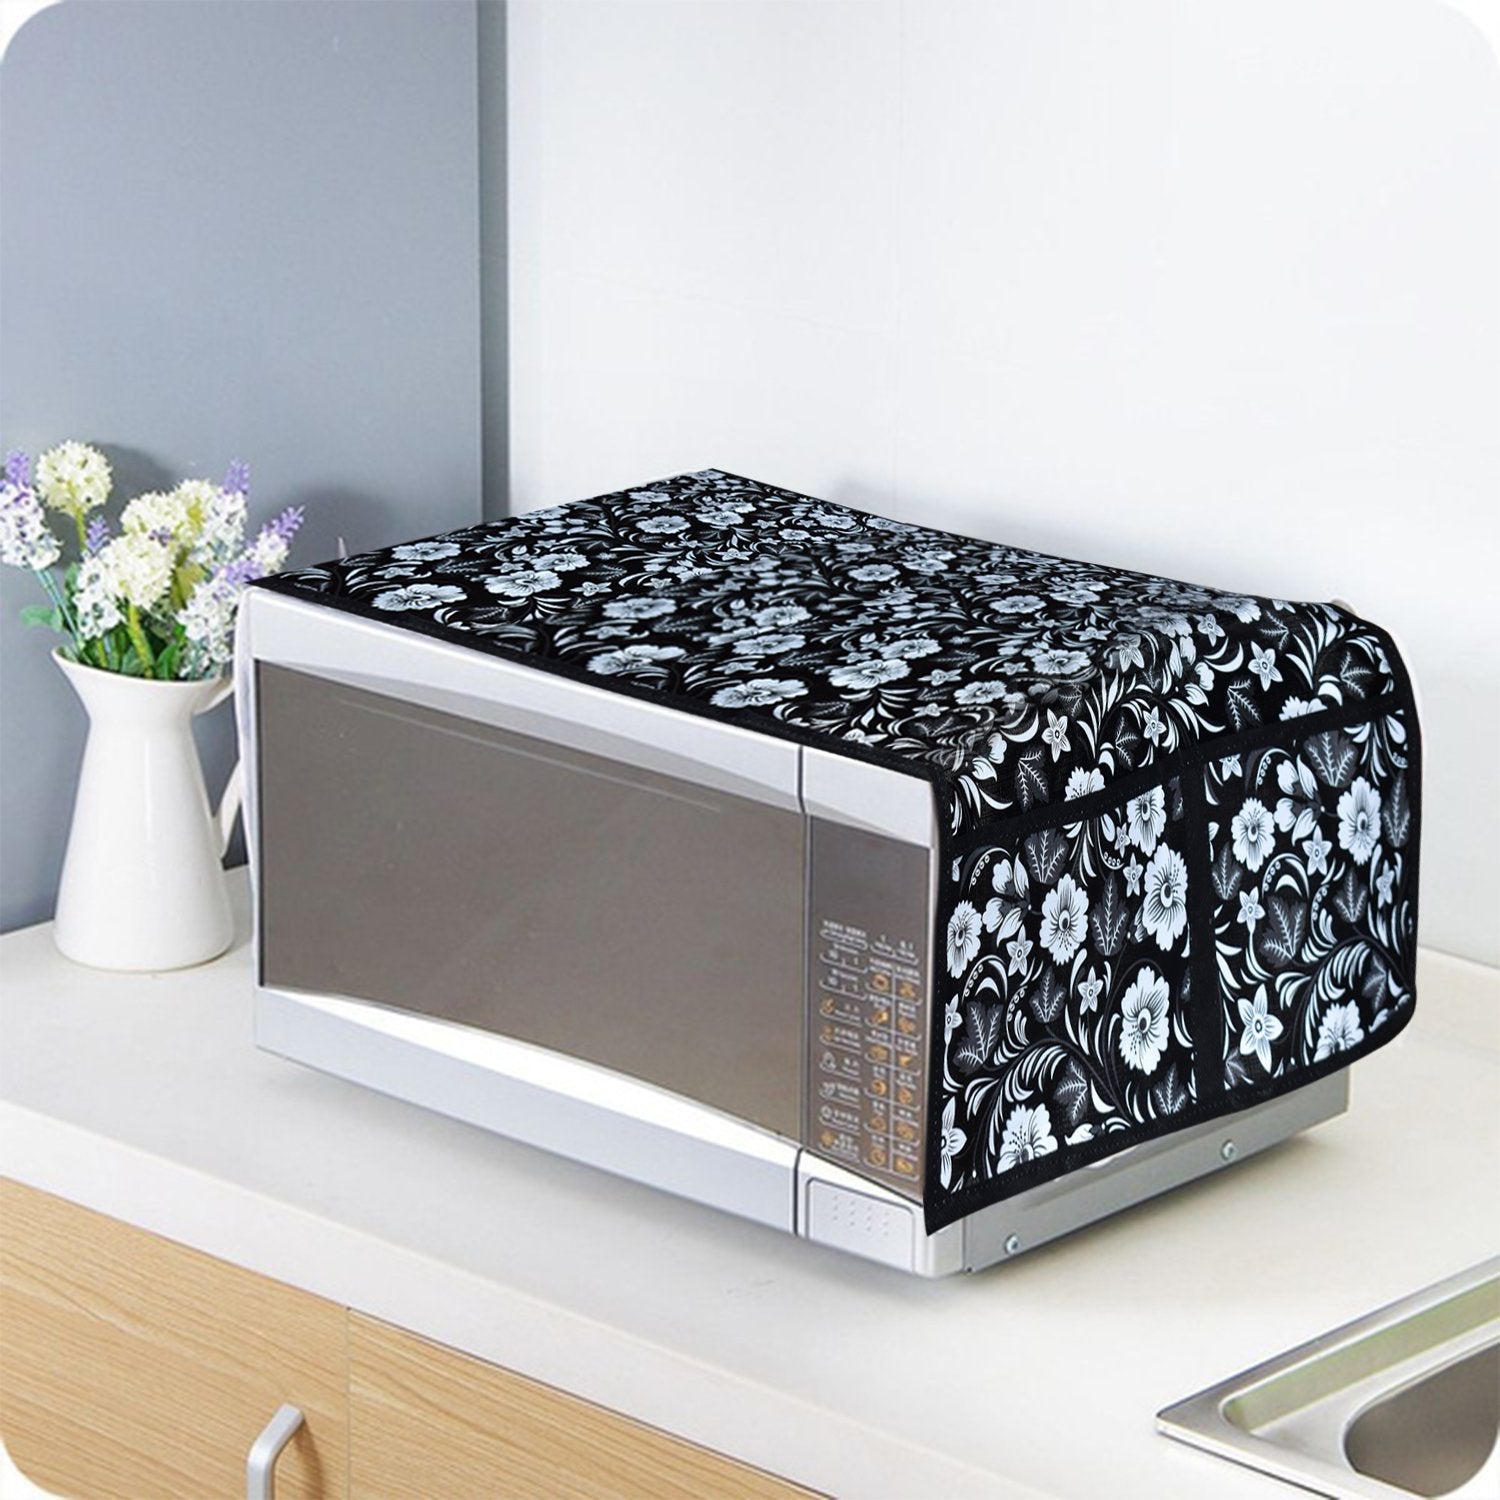 4666 Microwave Oven Cover DeoDap